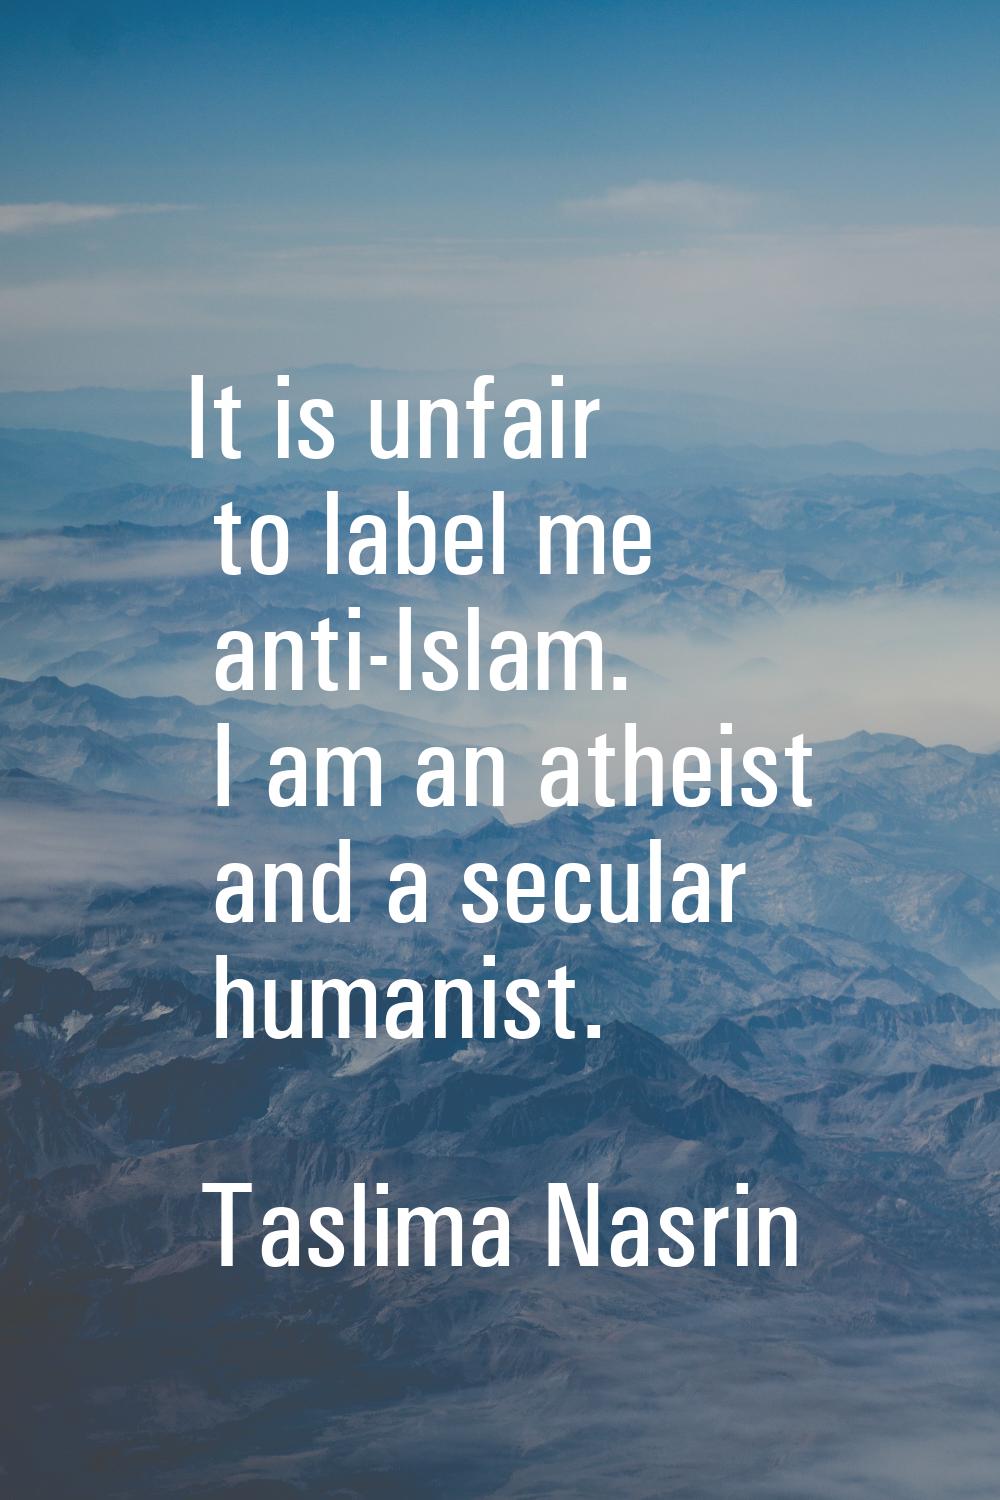 It is unfair to label me anti-Islam. I am an atheist and a secular humanist.